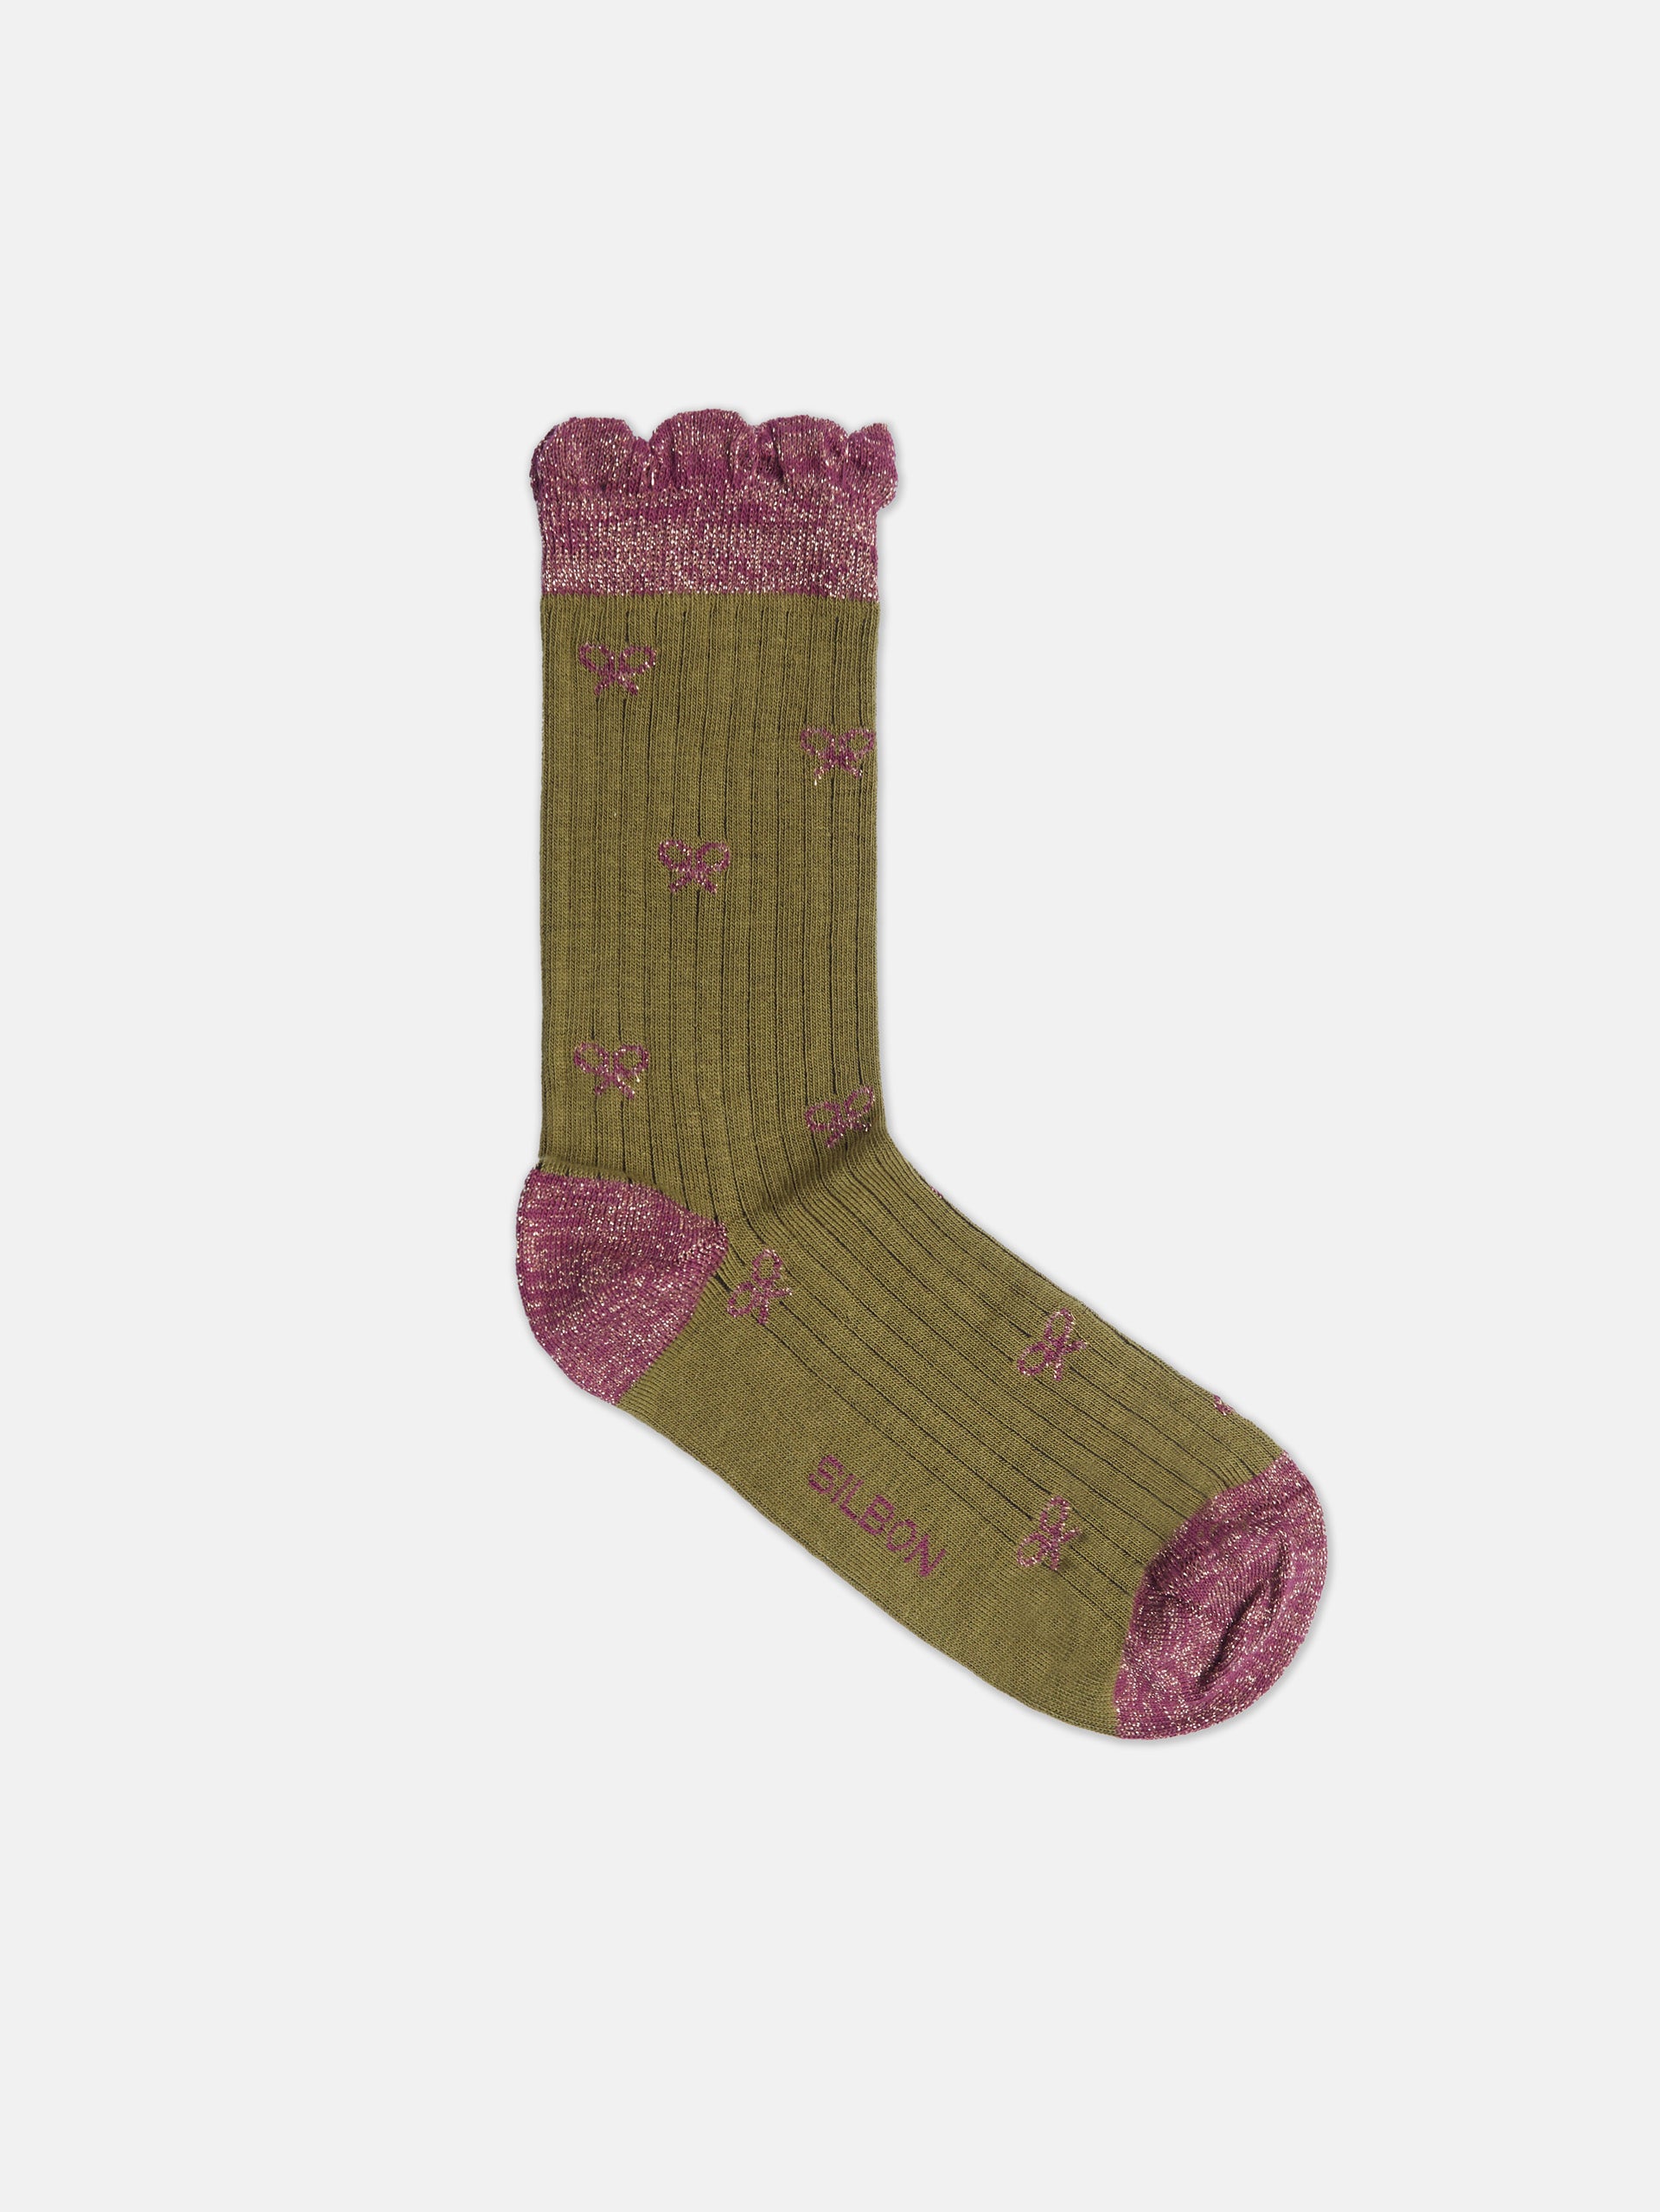 Green ribbed sock with purple lurex rackets